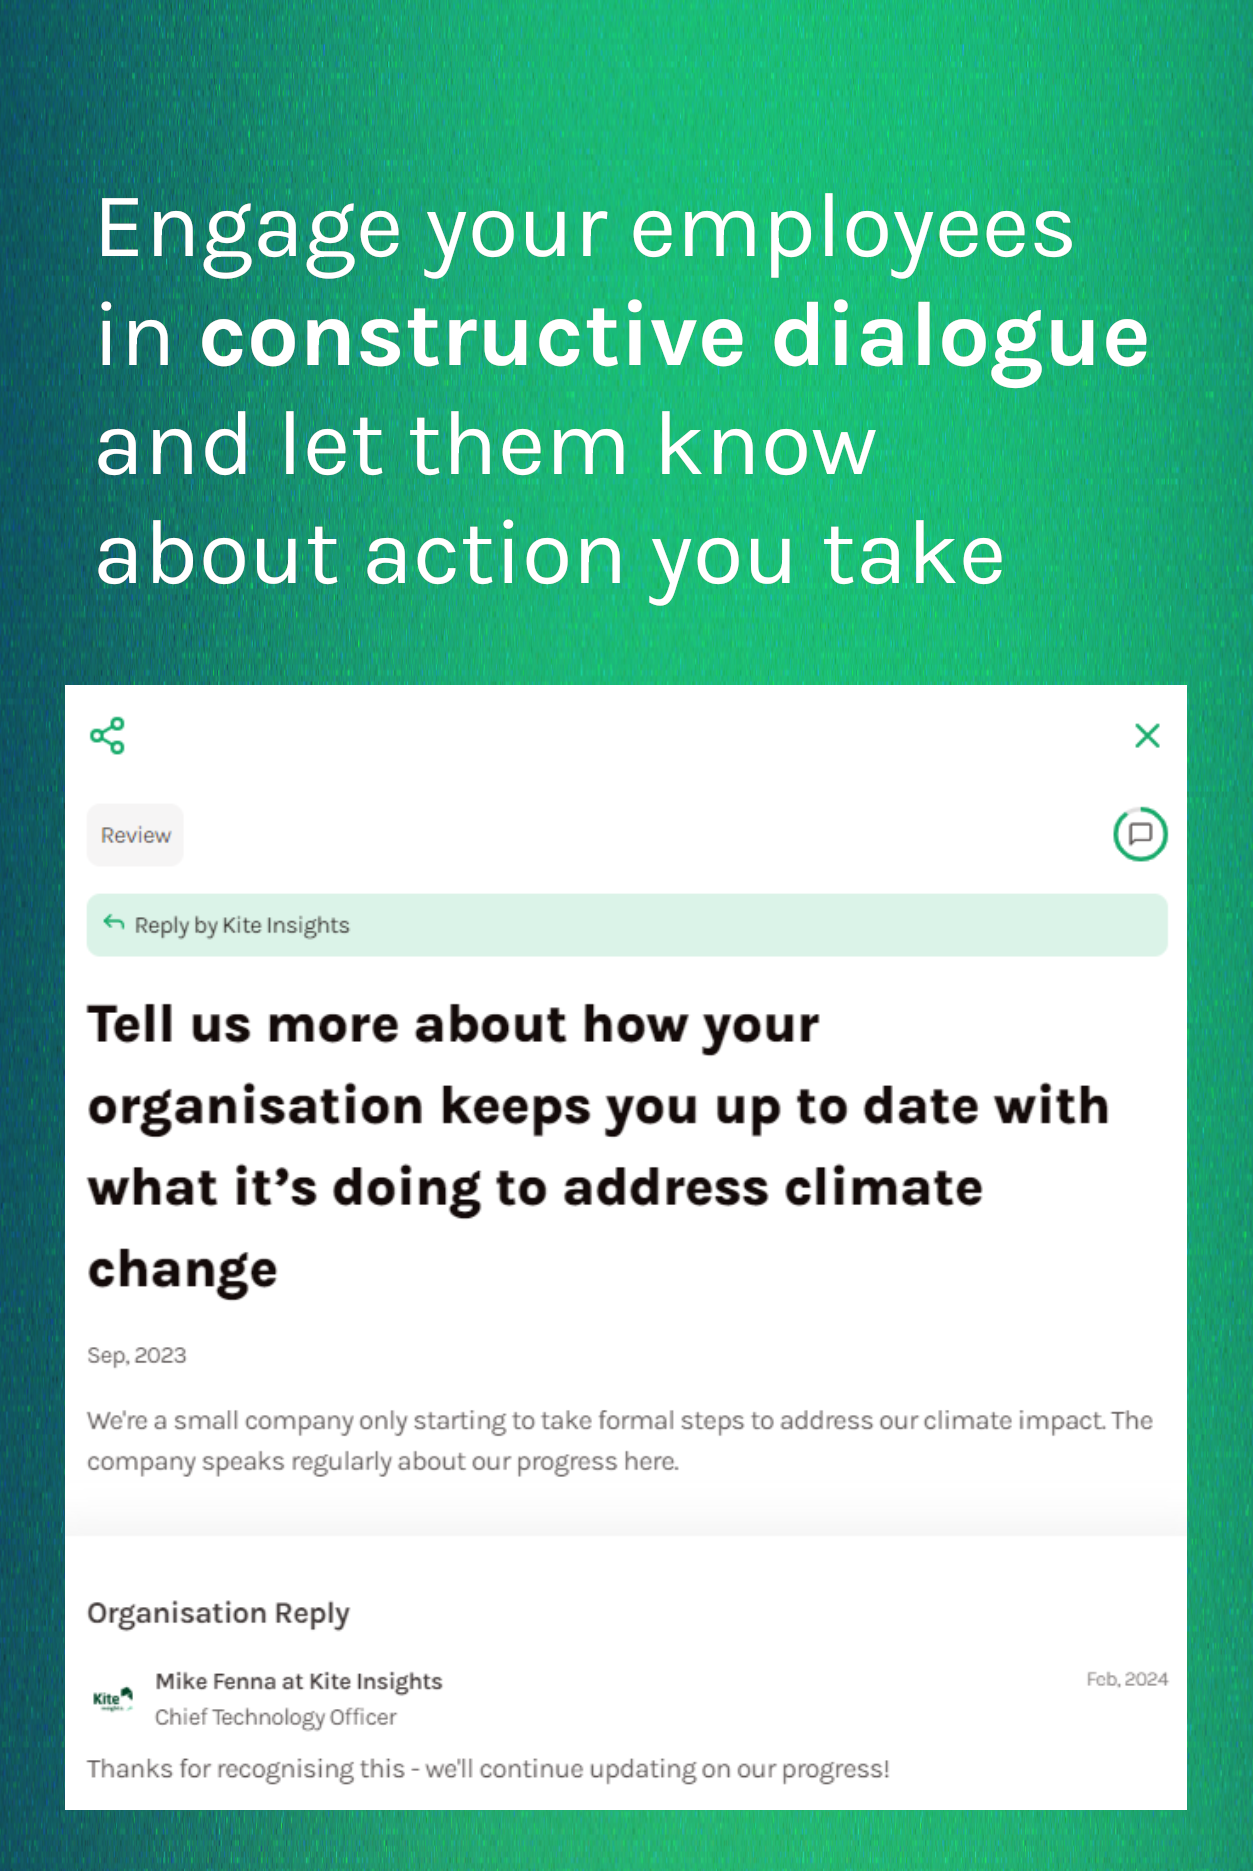 Engage your employees in constructive dialogue and let them know about action you take